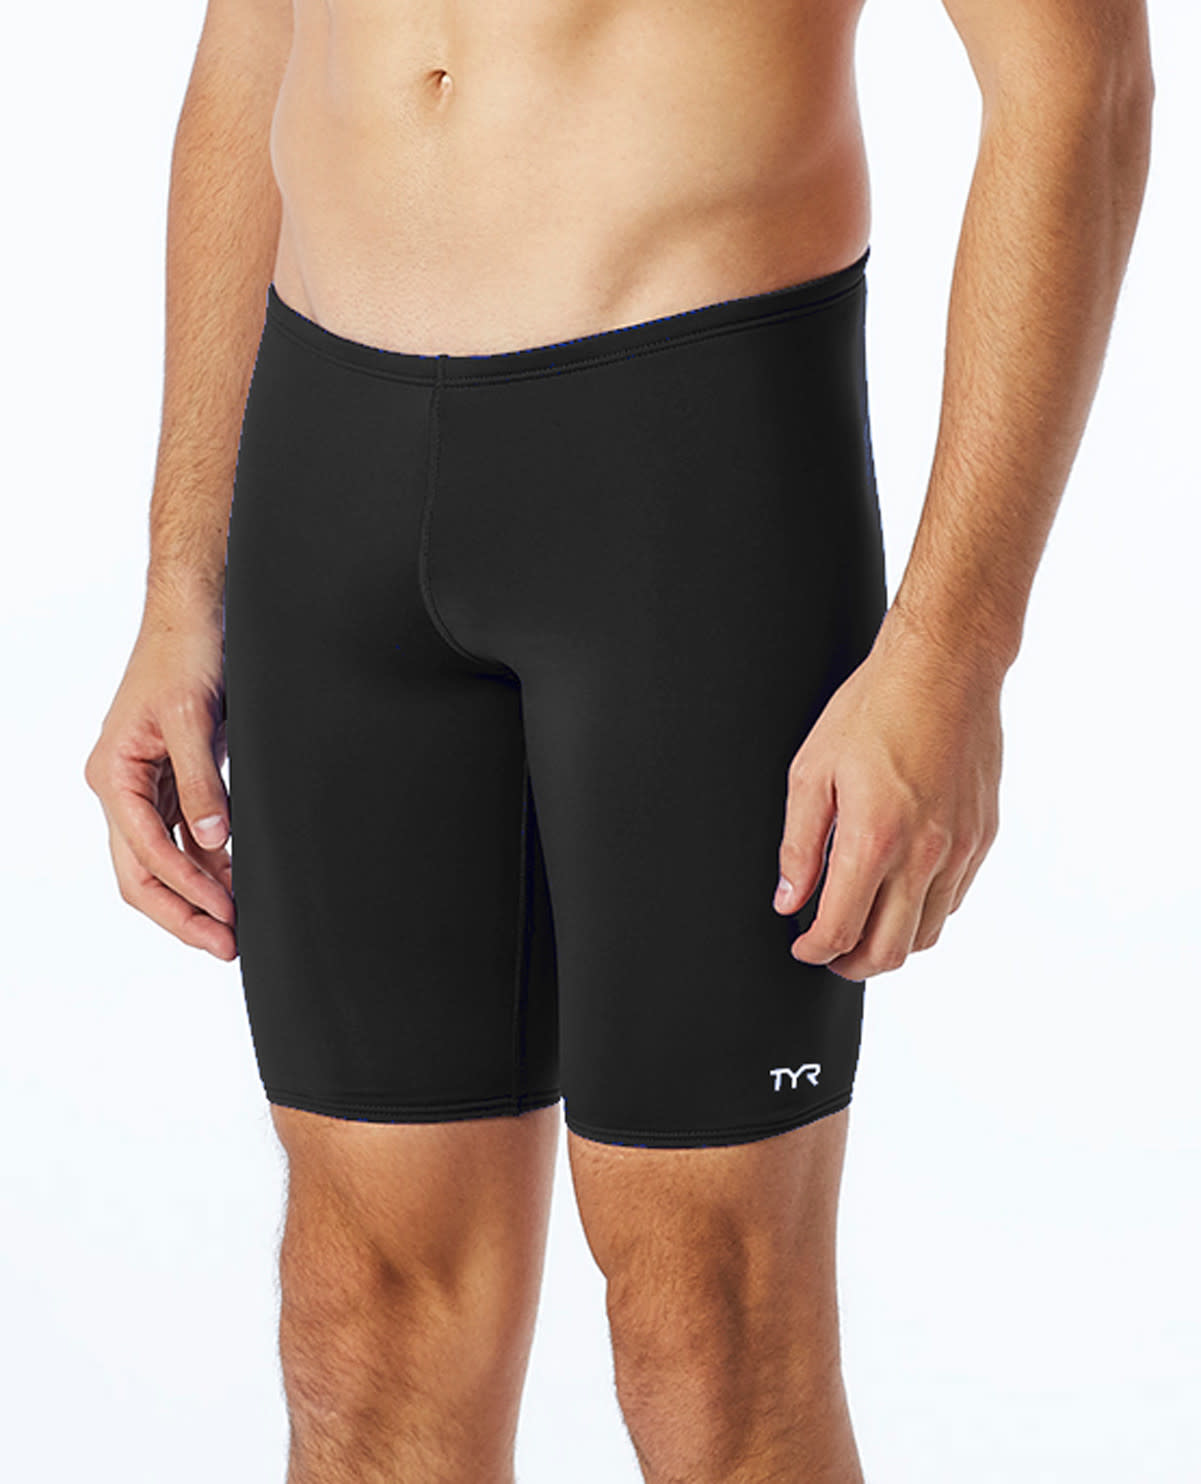 James River  Black Polyester Jammer (REQUIRED)